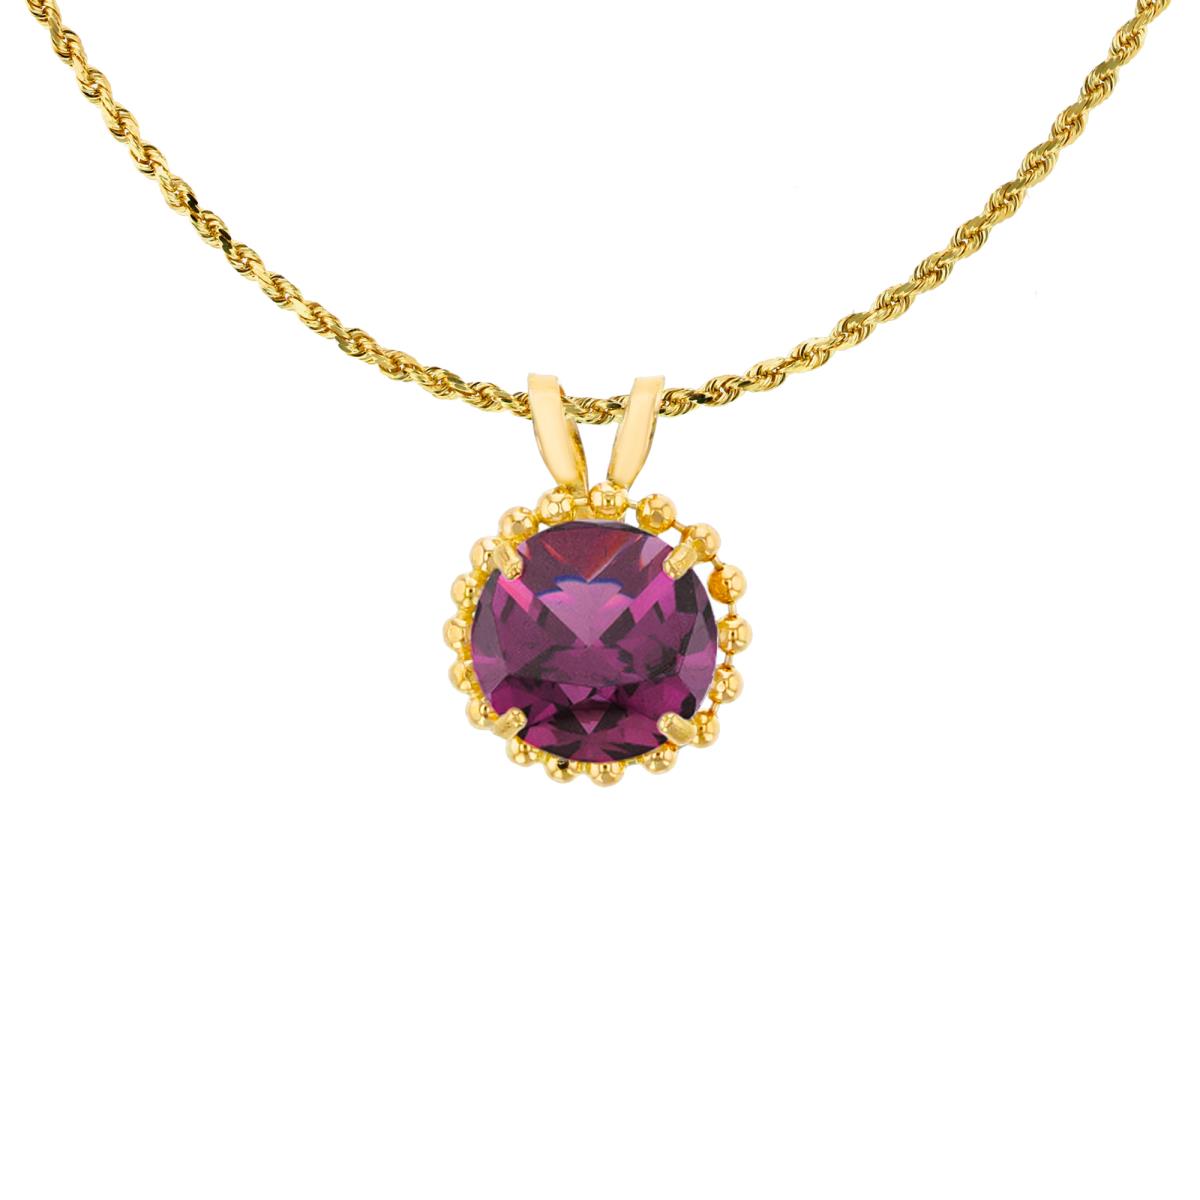 10K Yellow Gold 6mm Rd Cut Rhodolite with Bead Frame Rabbit Ear 18" Necklace